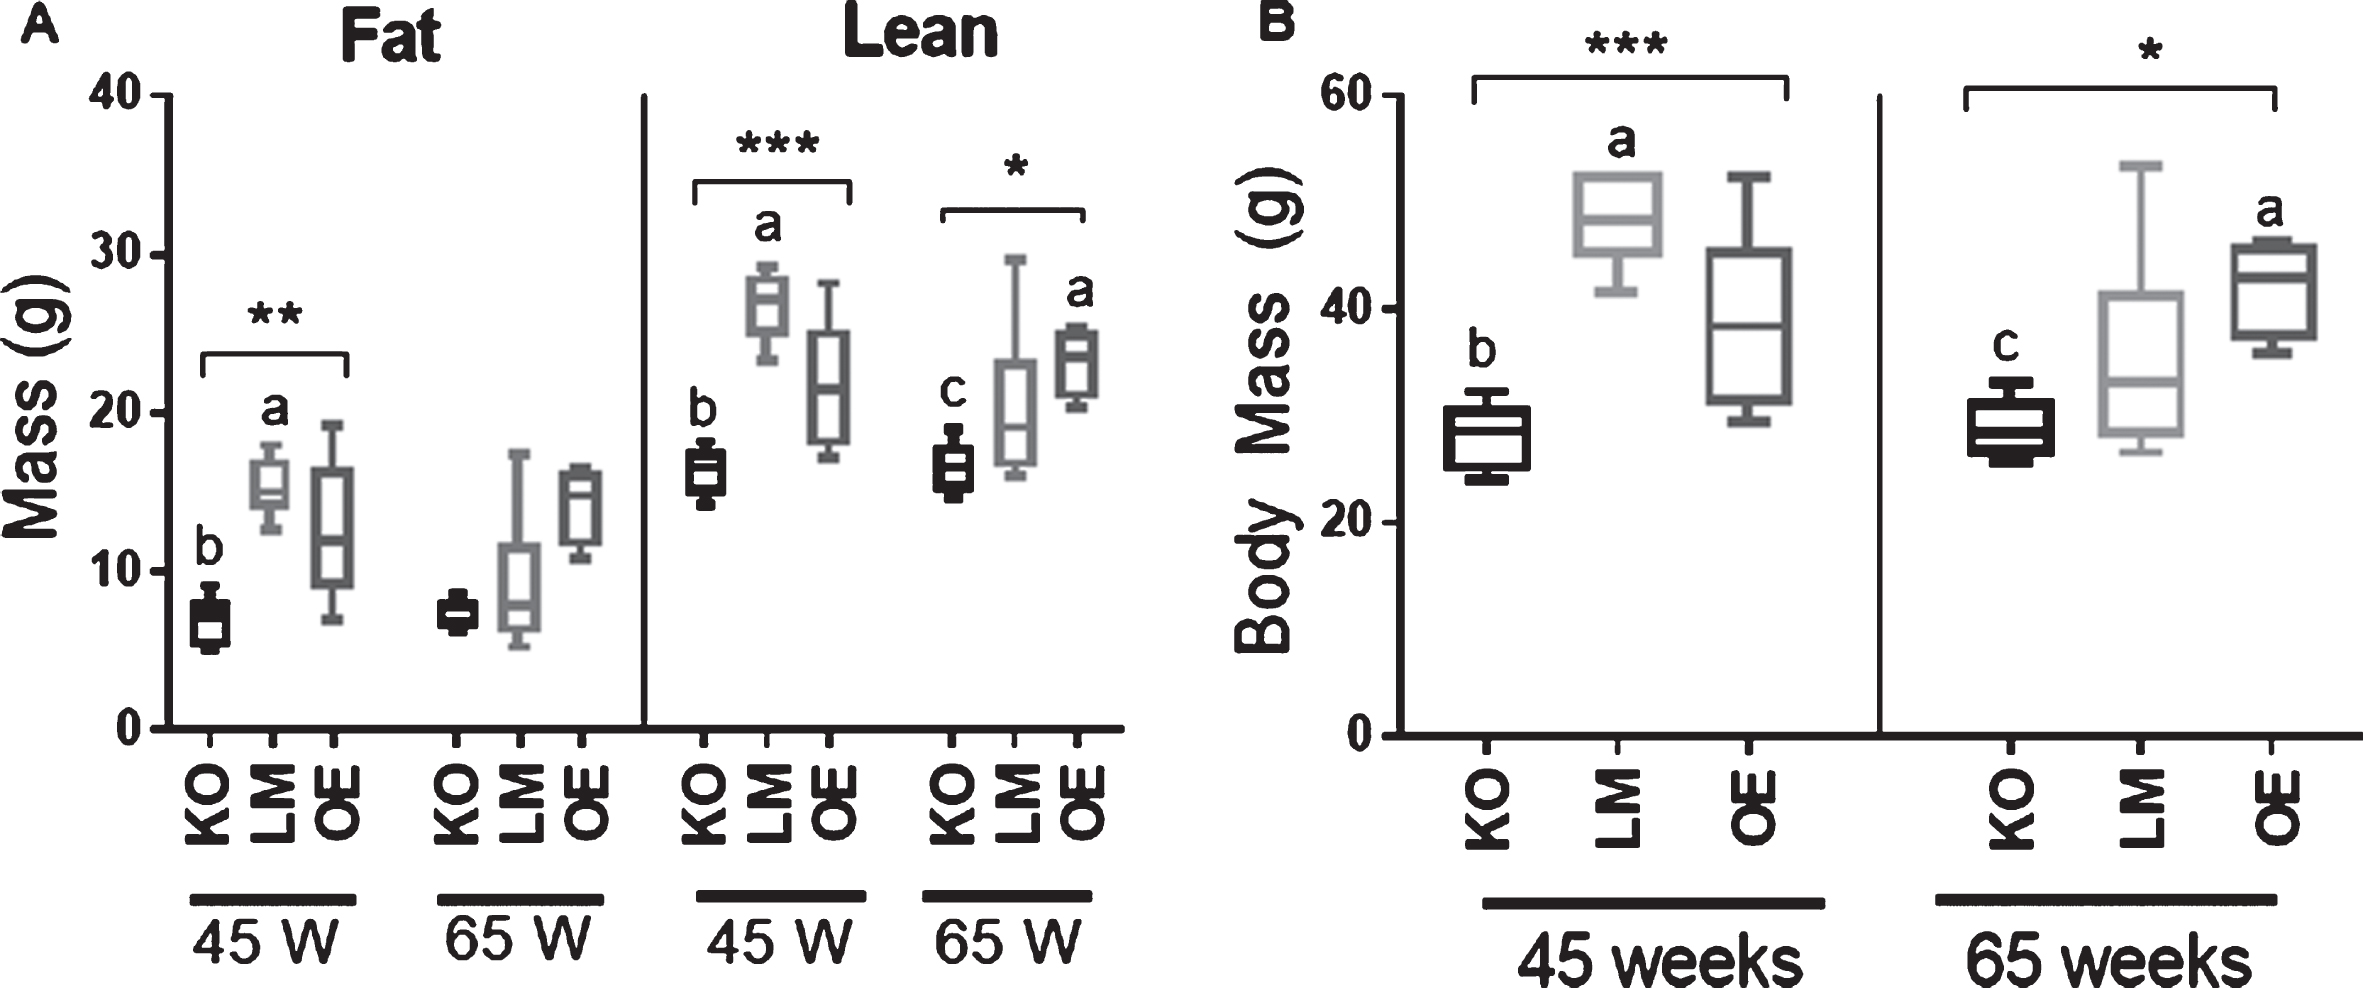 Body composition analysis in male mice. (A) Fat mass and lean mass in mice with brain-specific knockout (KO) or overexpression (OE) of SIRT1 vs. littermate controls (LM) at 45 and 65 weeks of age. n = 4-10 mice per experimental group. (B) Body weight measurement; n = 4-10 mice per experimental group. *p<0.05, **p<0.01, ***p<0.001, ****p<0.0001. Error bars represent the mean±SEM. Different letters (a,b,c) indicate statistically significant differences as determined from the Dunn’s post-hoc test corrected for multiple comparisons. a = group is significantly different to KO; b = group is significantly different to LM; c = group is significantly different to OE.